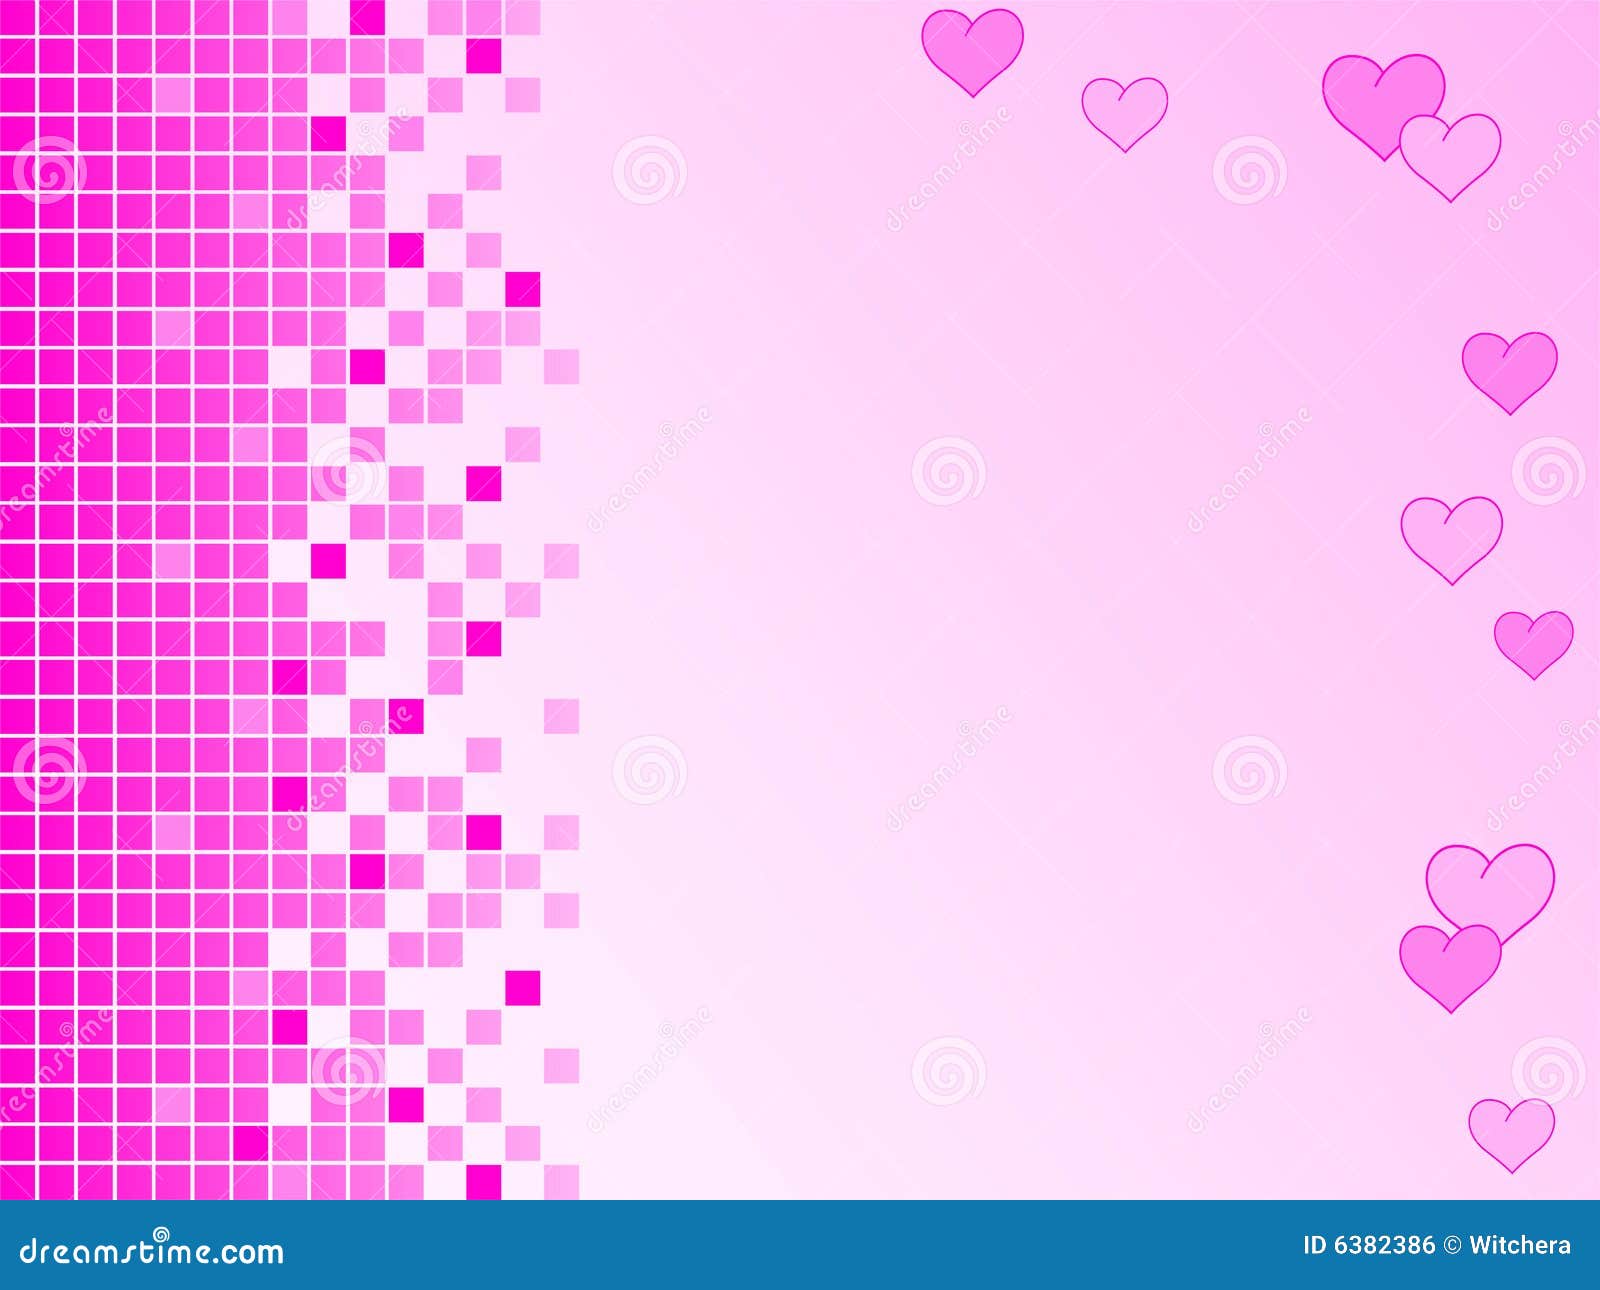 Pink Background With Pixels And Hearts Royalty Free Stock Image - Image